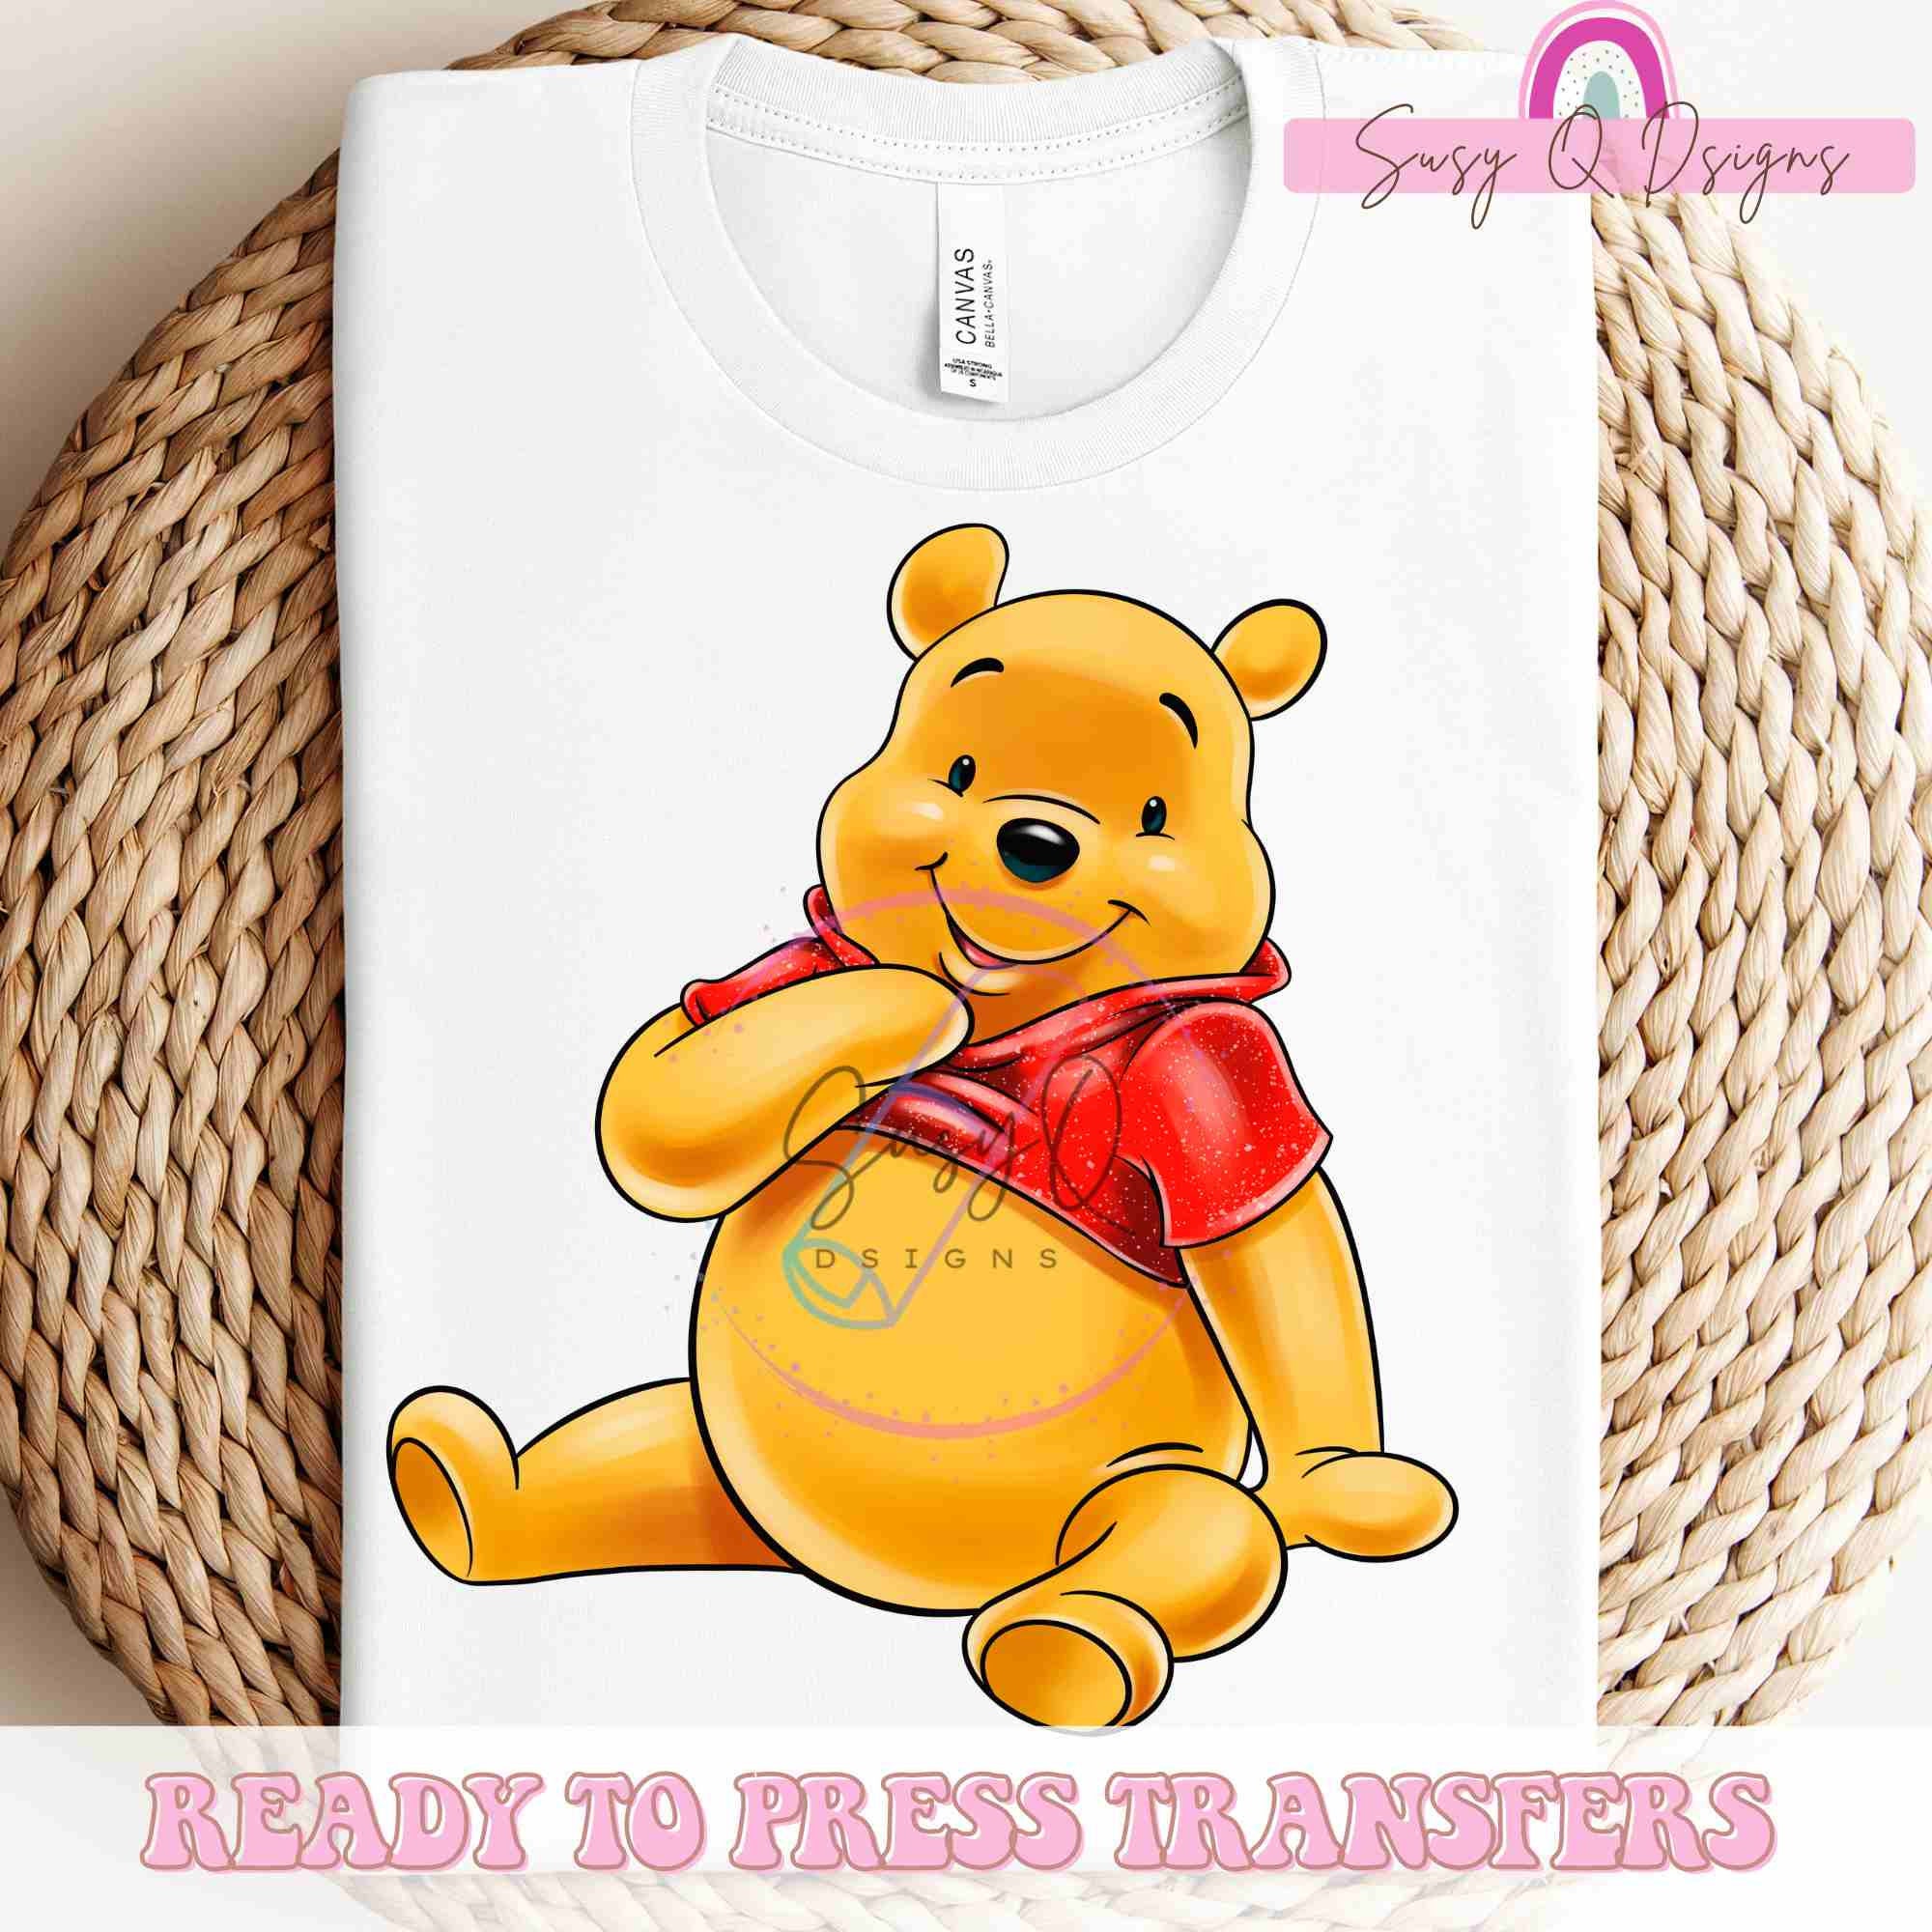 Winnie The Pooh & Teddy bear Large Patches Iron-On Transfers For Clothes  Heat Transfer Vinyl Sticker For Boys Ladies Hoodie DIY